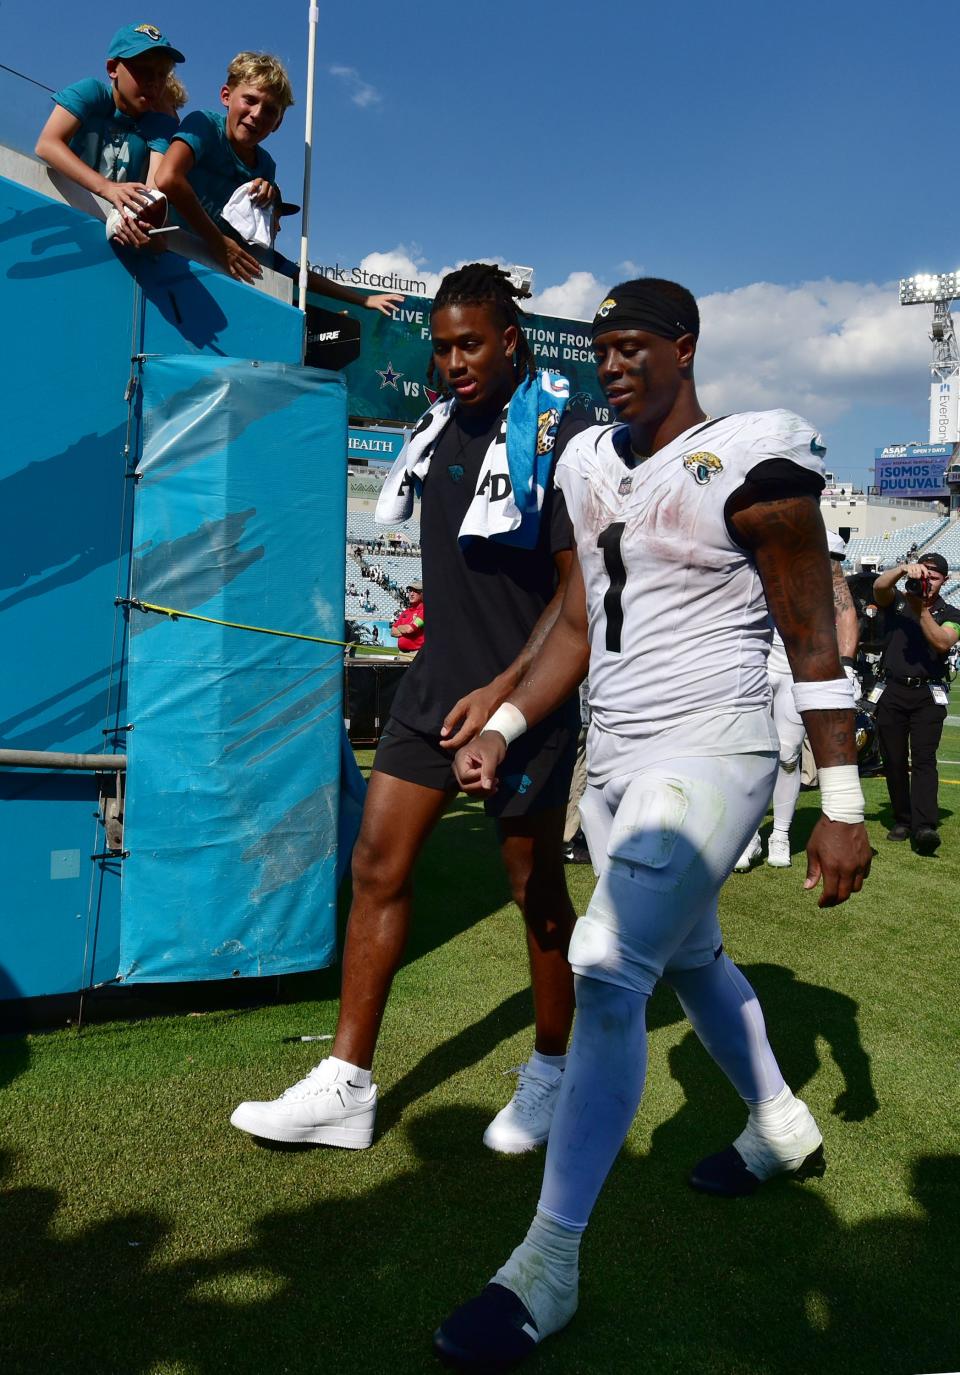 Jacksonville Jaguars running back Travis Etienne Jr. (1) heads to the locker room after Sunday's defeat by the Houston Texans. The Jacksonville Jaguars hosted the Houston Texans at EverBank Stadium in Jacksonville, Fla. Sunday, September 24, 2023. The Jaguars trailed 17 to 0 at the end of the first half and lost with a final score of 37-17. [Bob Self/Florida Times-Union]